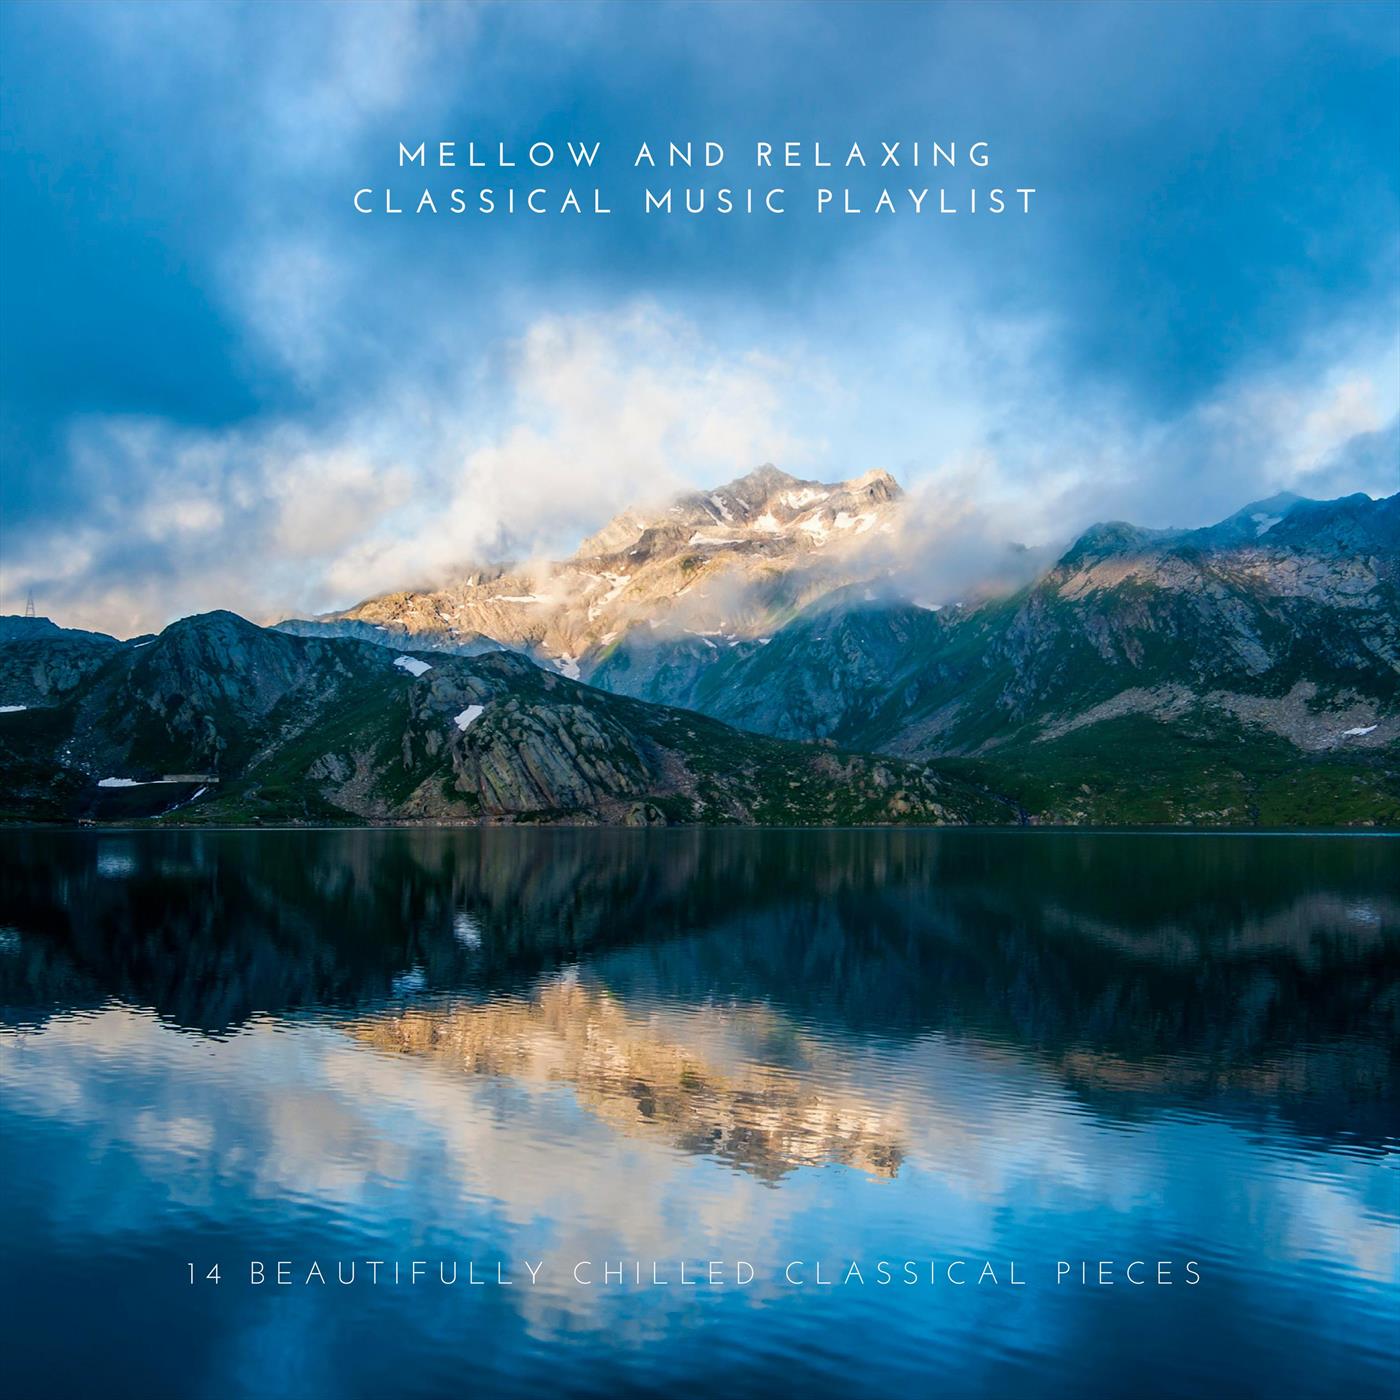 Mellow and Relaxing Classical Music Playlist: 14 Beautifully Chilled Classical Pieces